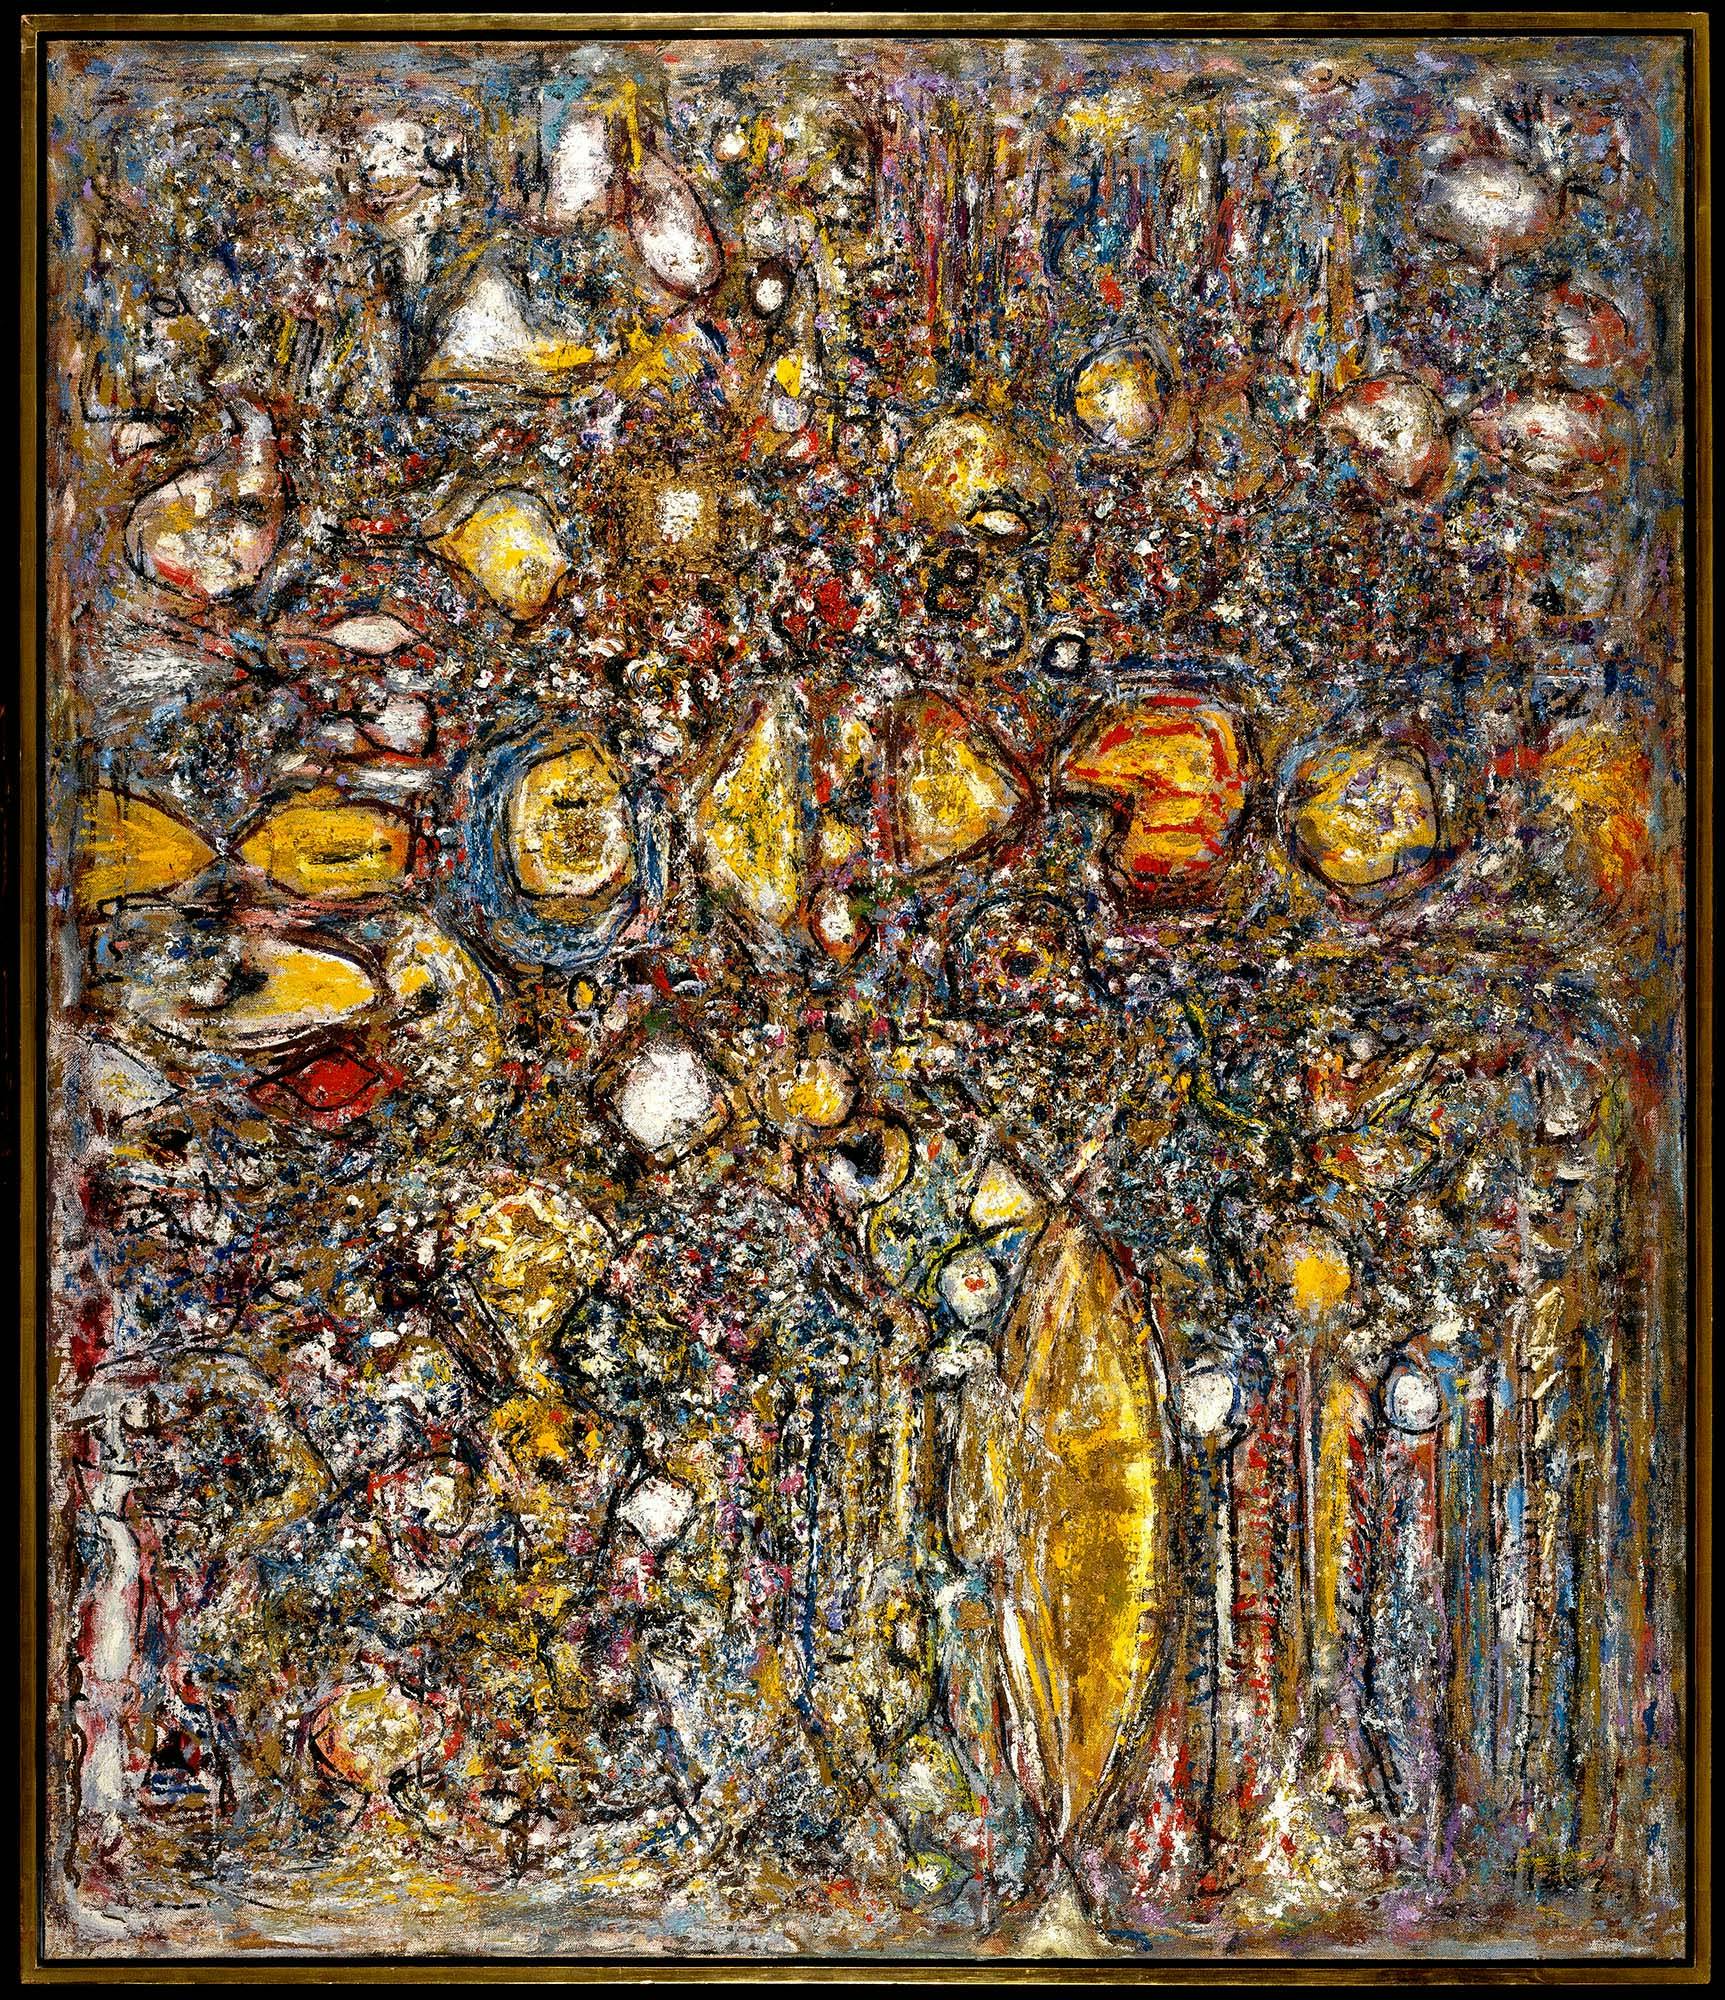 Amaranth
1958
Oil on canvas
75 7/8 x 64 3/4 in. (192.6 x 164.5 cm)
Brooklyn Museum, Gift of Dr. and Mrs. Arthur E. Kahn, 87.239 (87.239)
 – The Richard Pousette-Dart Foundation